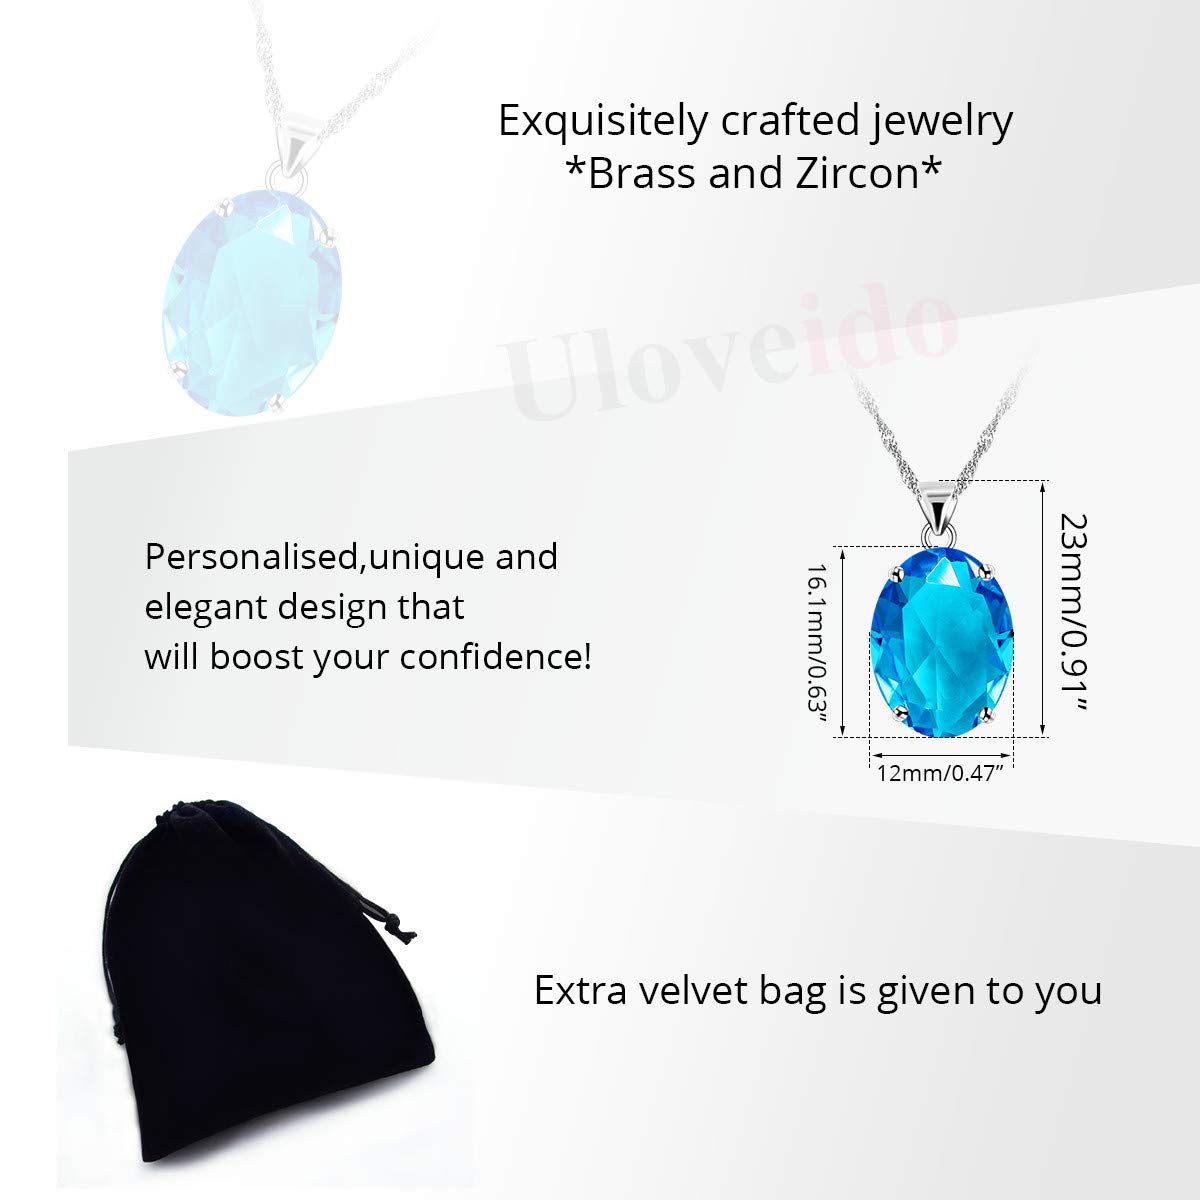 Uloveido Platinum Plated Blue Cubic Zirconia Solitaire Oval Pendant Necklace Birthstone Wedding Party Jewelry for Women Girls Y892